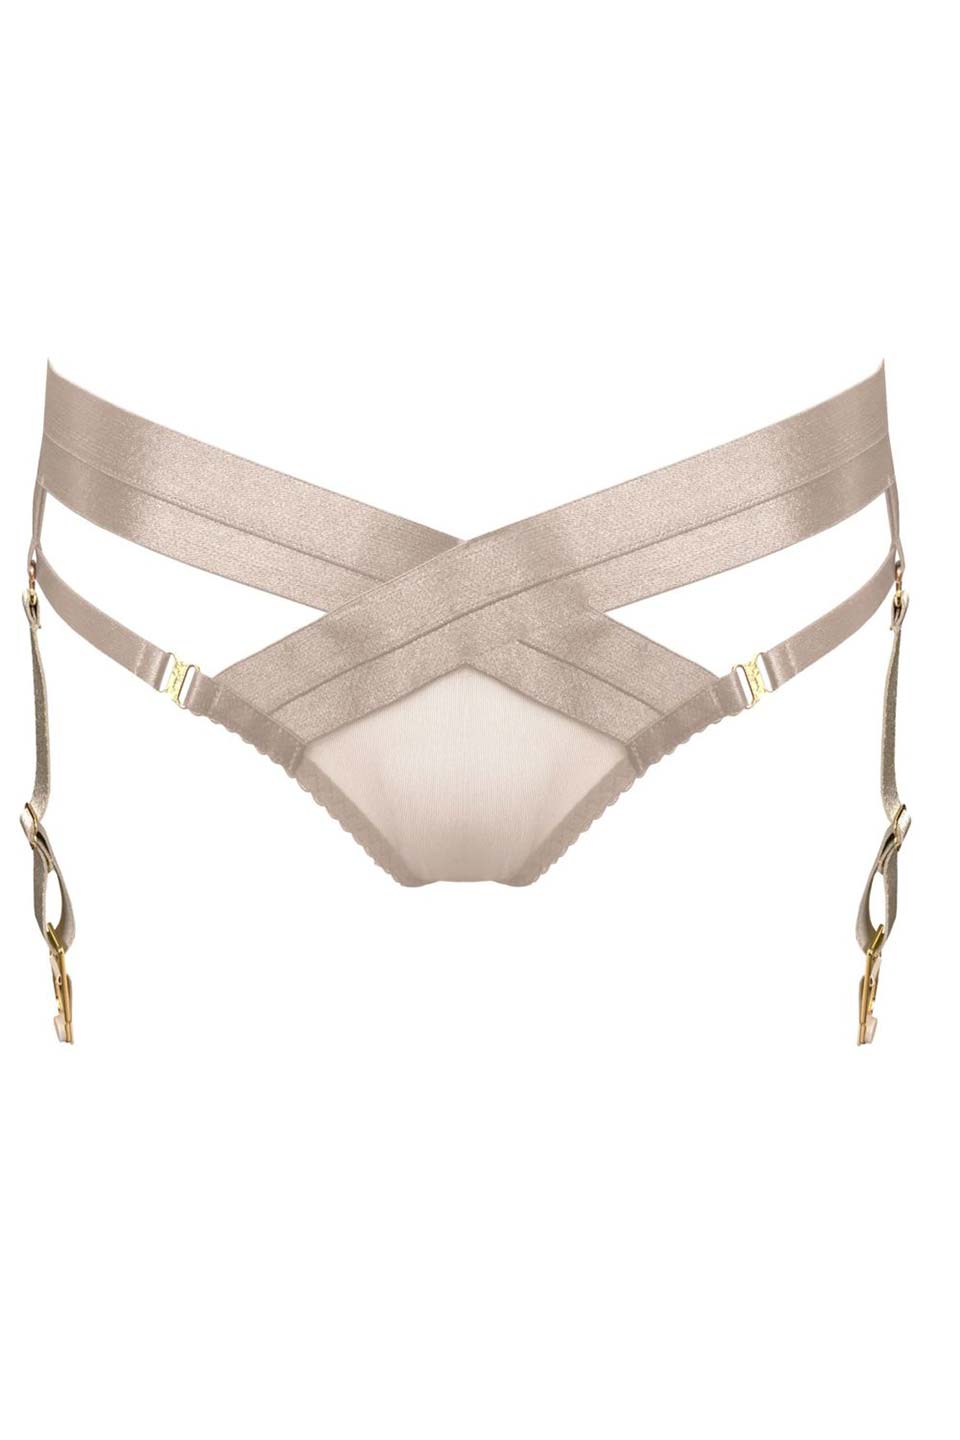 Atelier bordelle tomoe brief caramel front. Product gallery 1